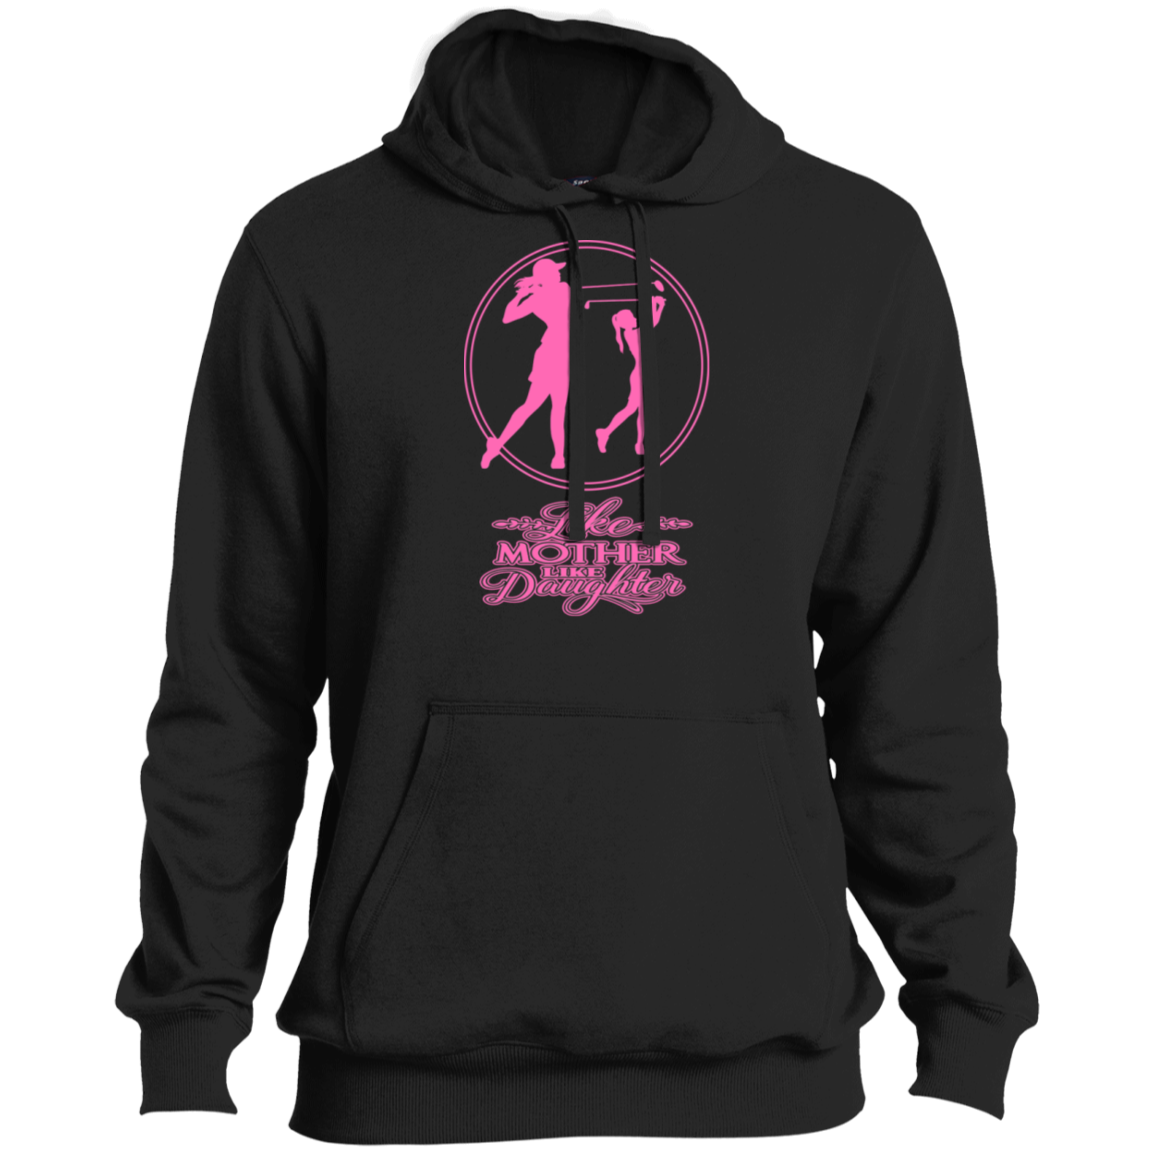 OPG Custom Design #7. Like Mother Like Daughter.  Softstyle Pullover Hoodie